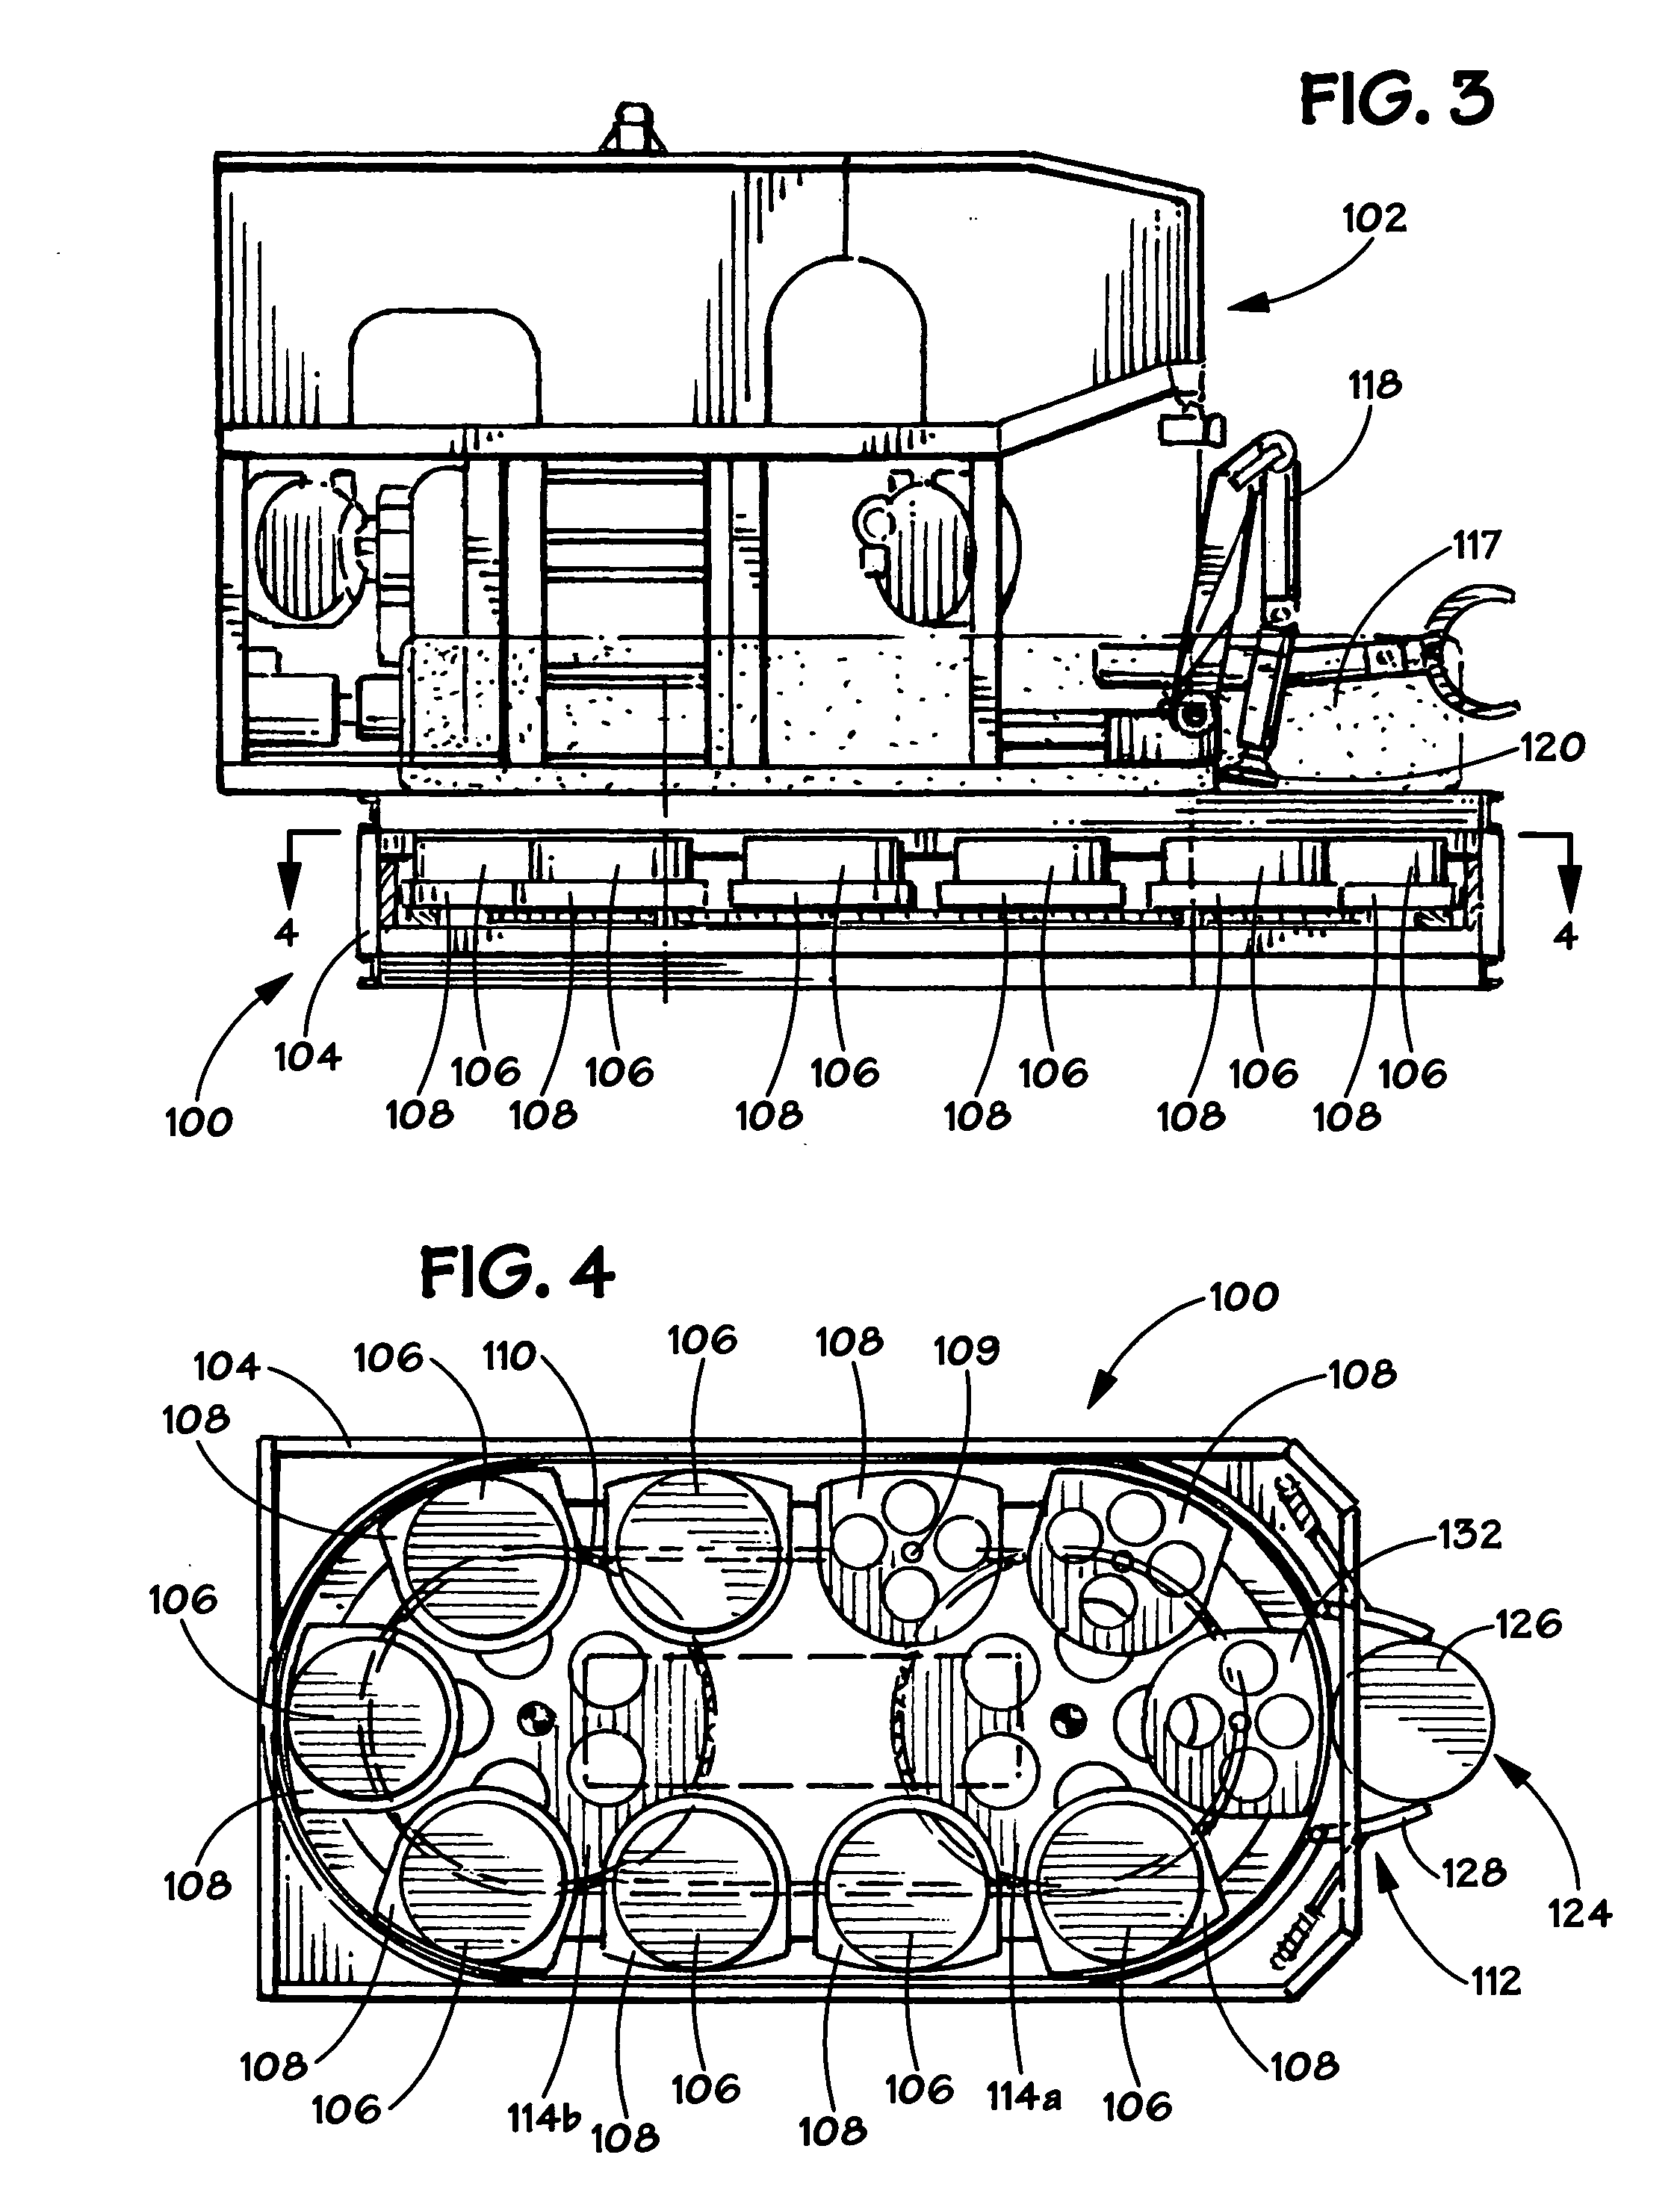 Method and apparatus for installing a sensor array